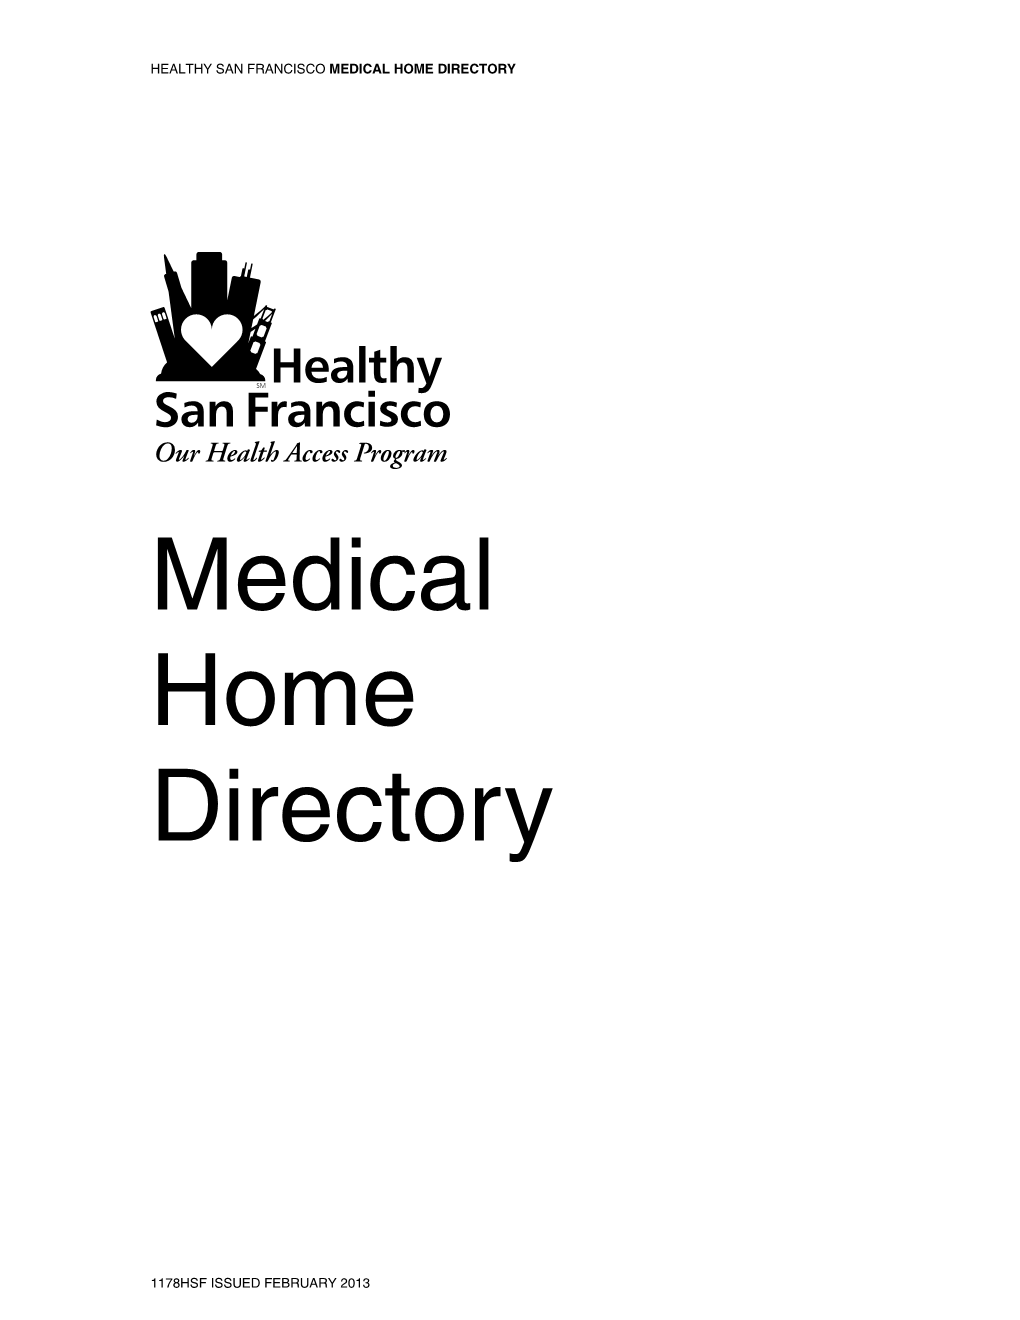 HSF Medical Home Directory